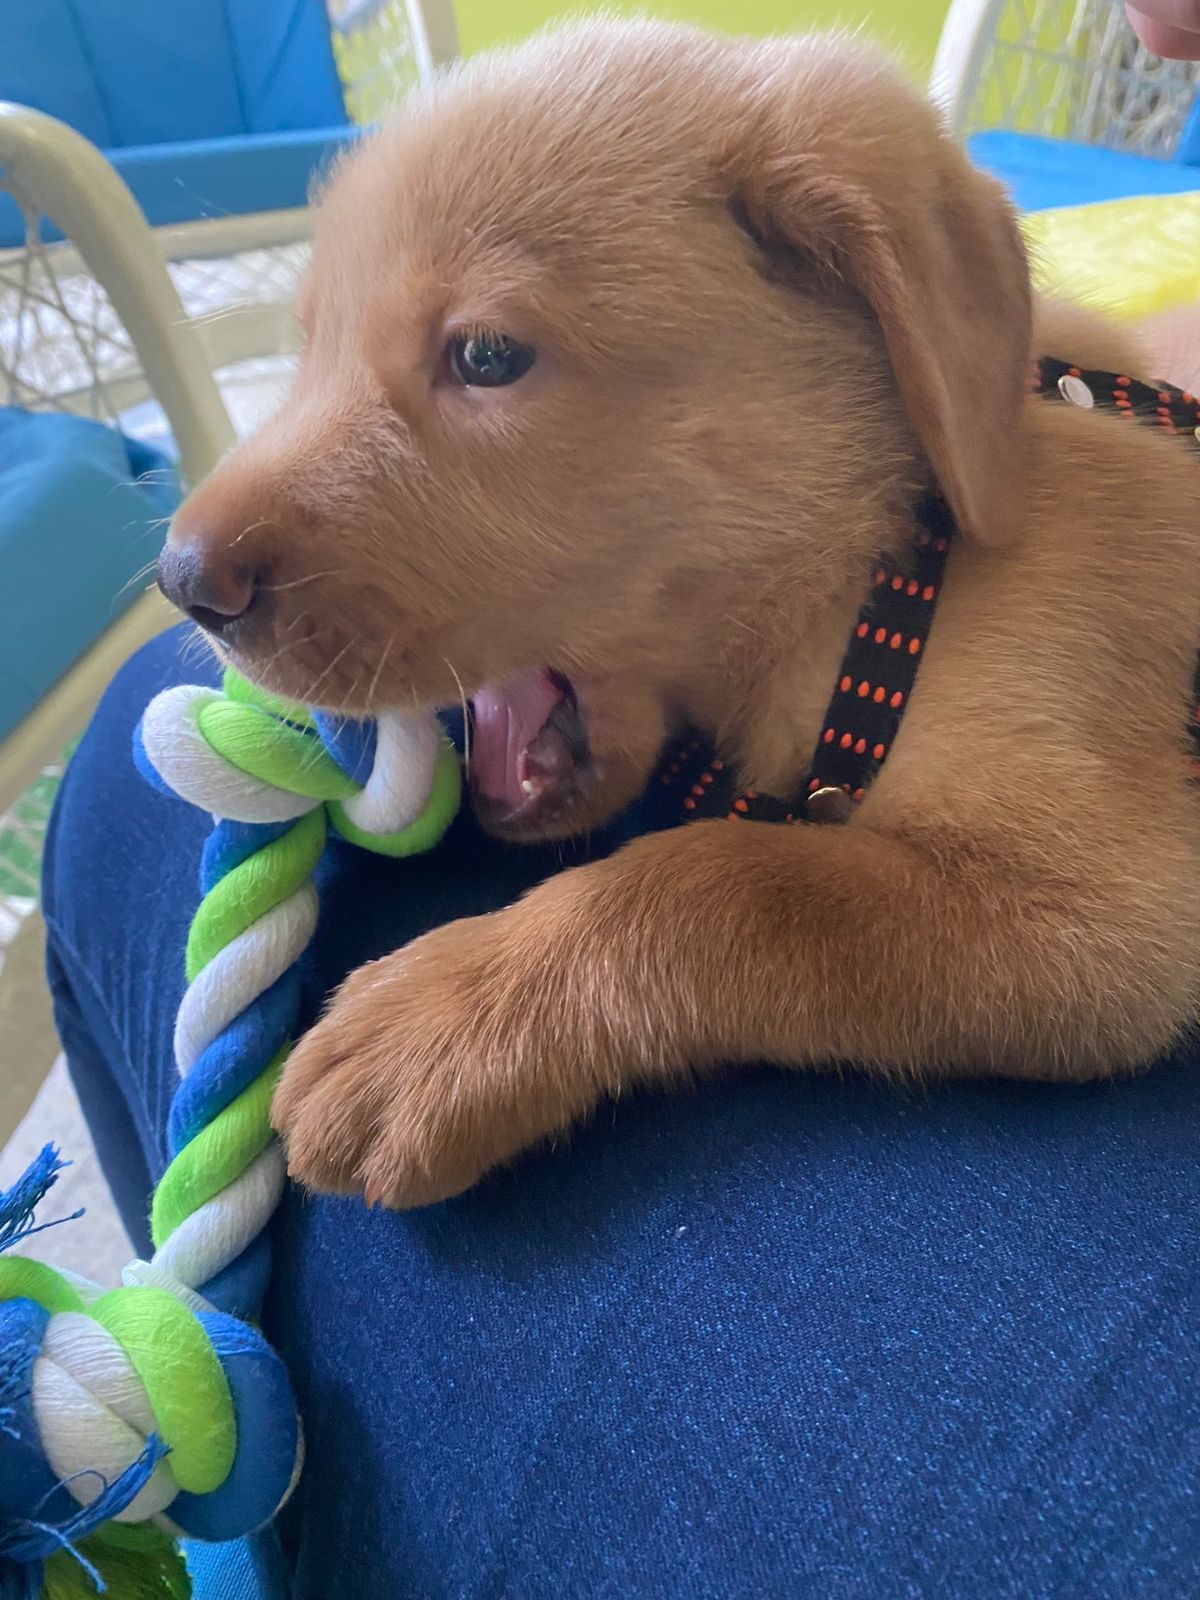 brown puppy laying on someone's lap and playing with a green and white rope toy.jfif